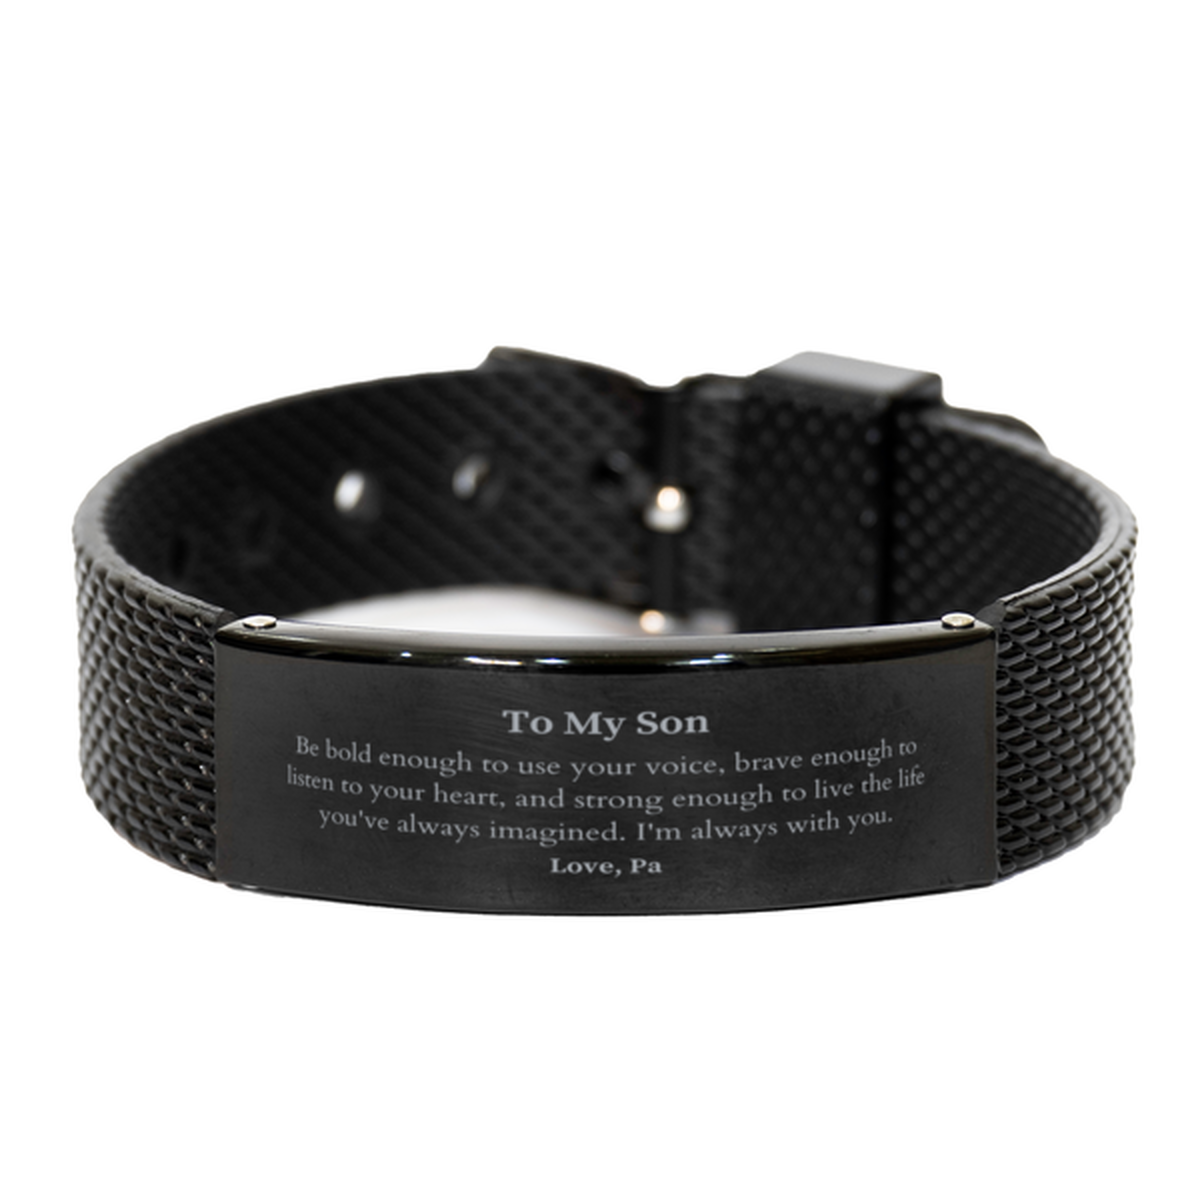 Keepsake Son Black Shark Mesh Bracelet Gift Idea Graduation Christmas Birthday Son from Pa, Son Be bold enough to use your voice, brave enough to listen to your heart. Love, Pa